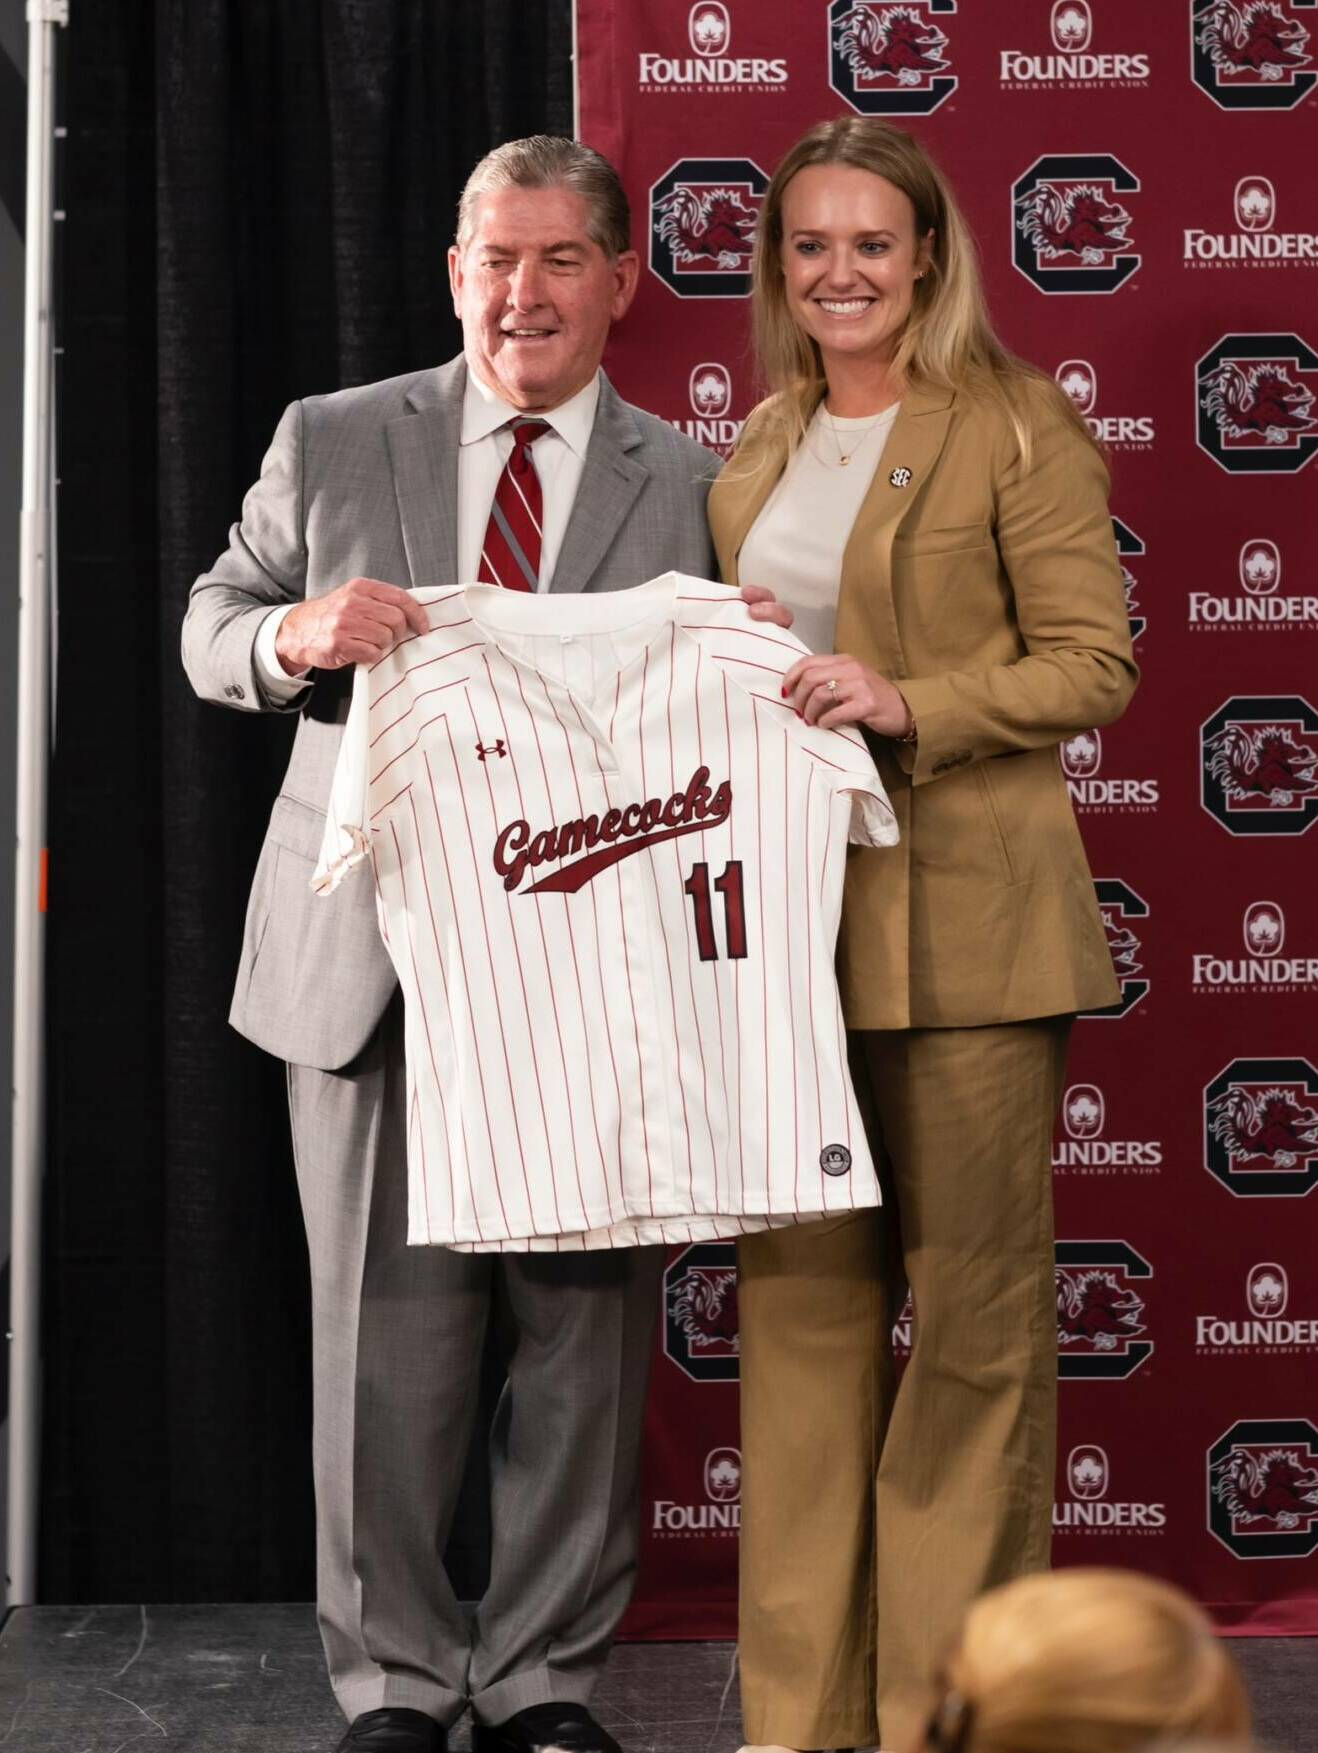 VIDEO: Ashley Chastain Introductory Press Conference